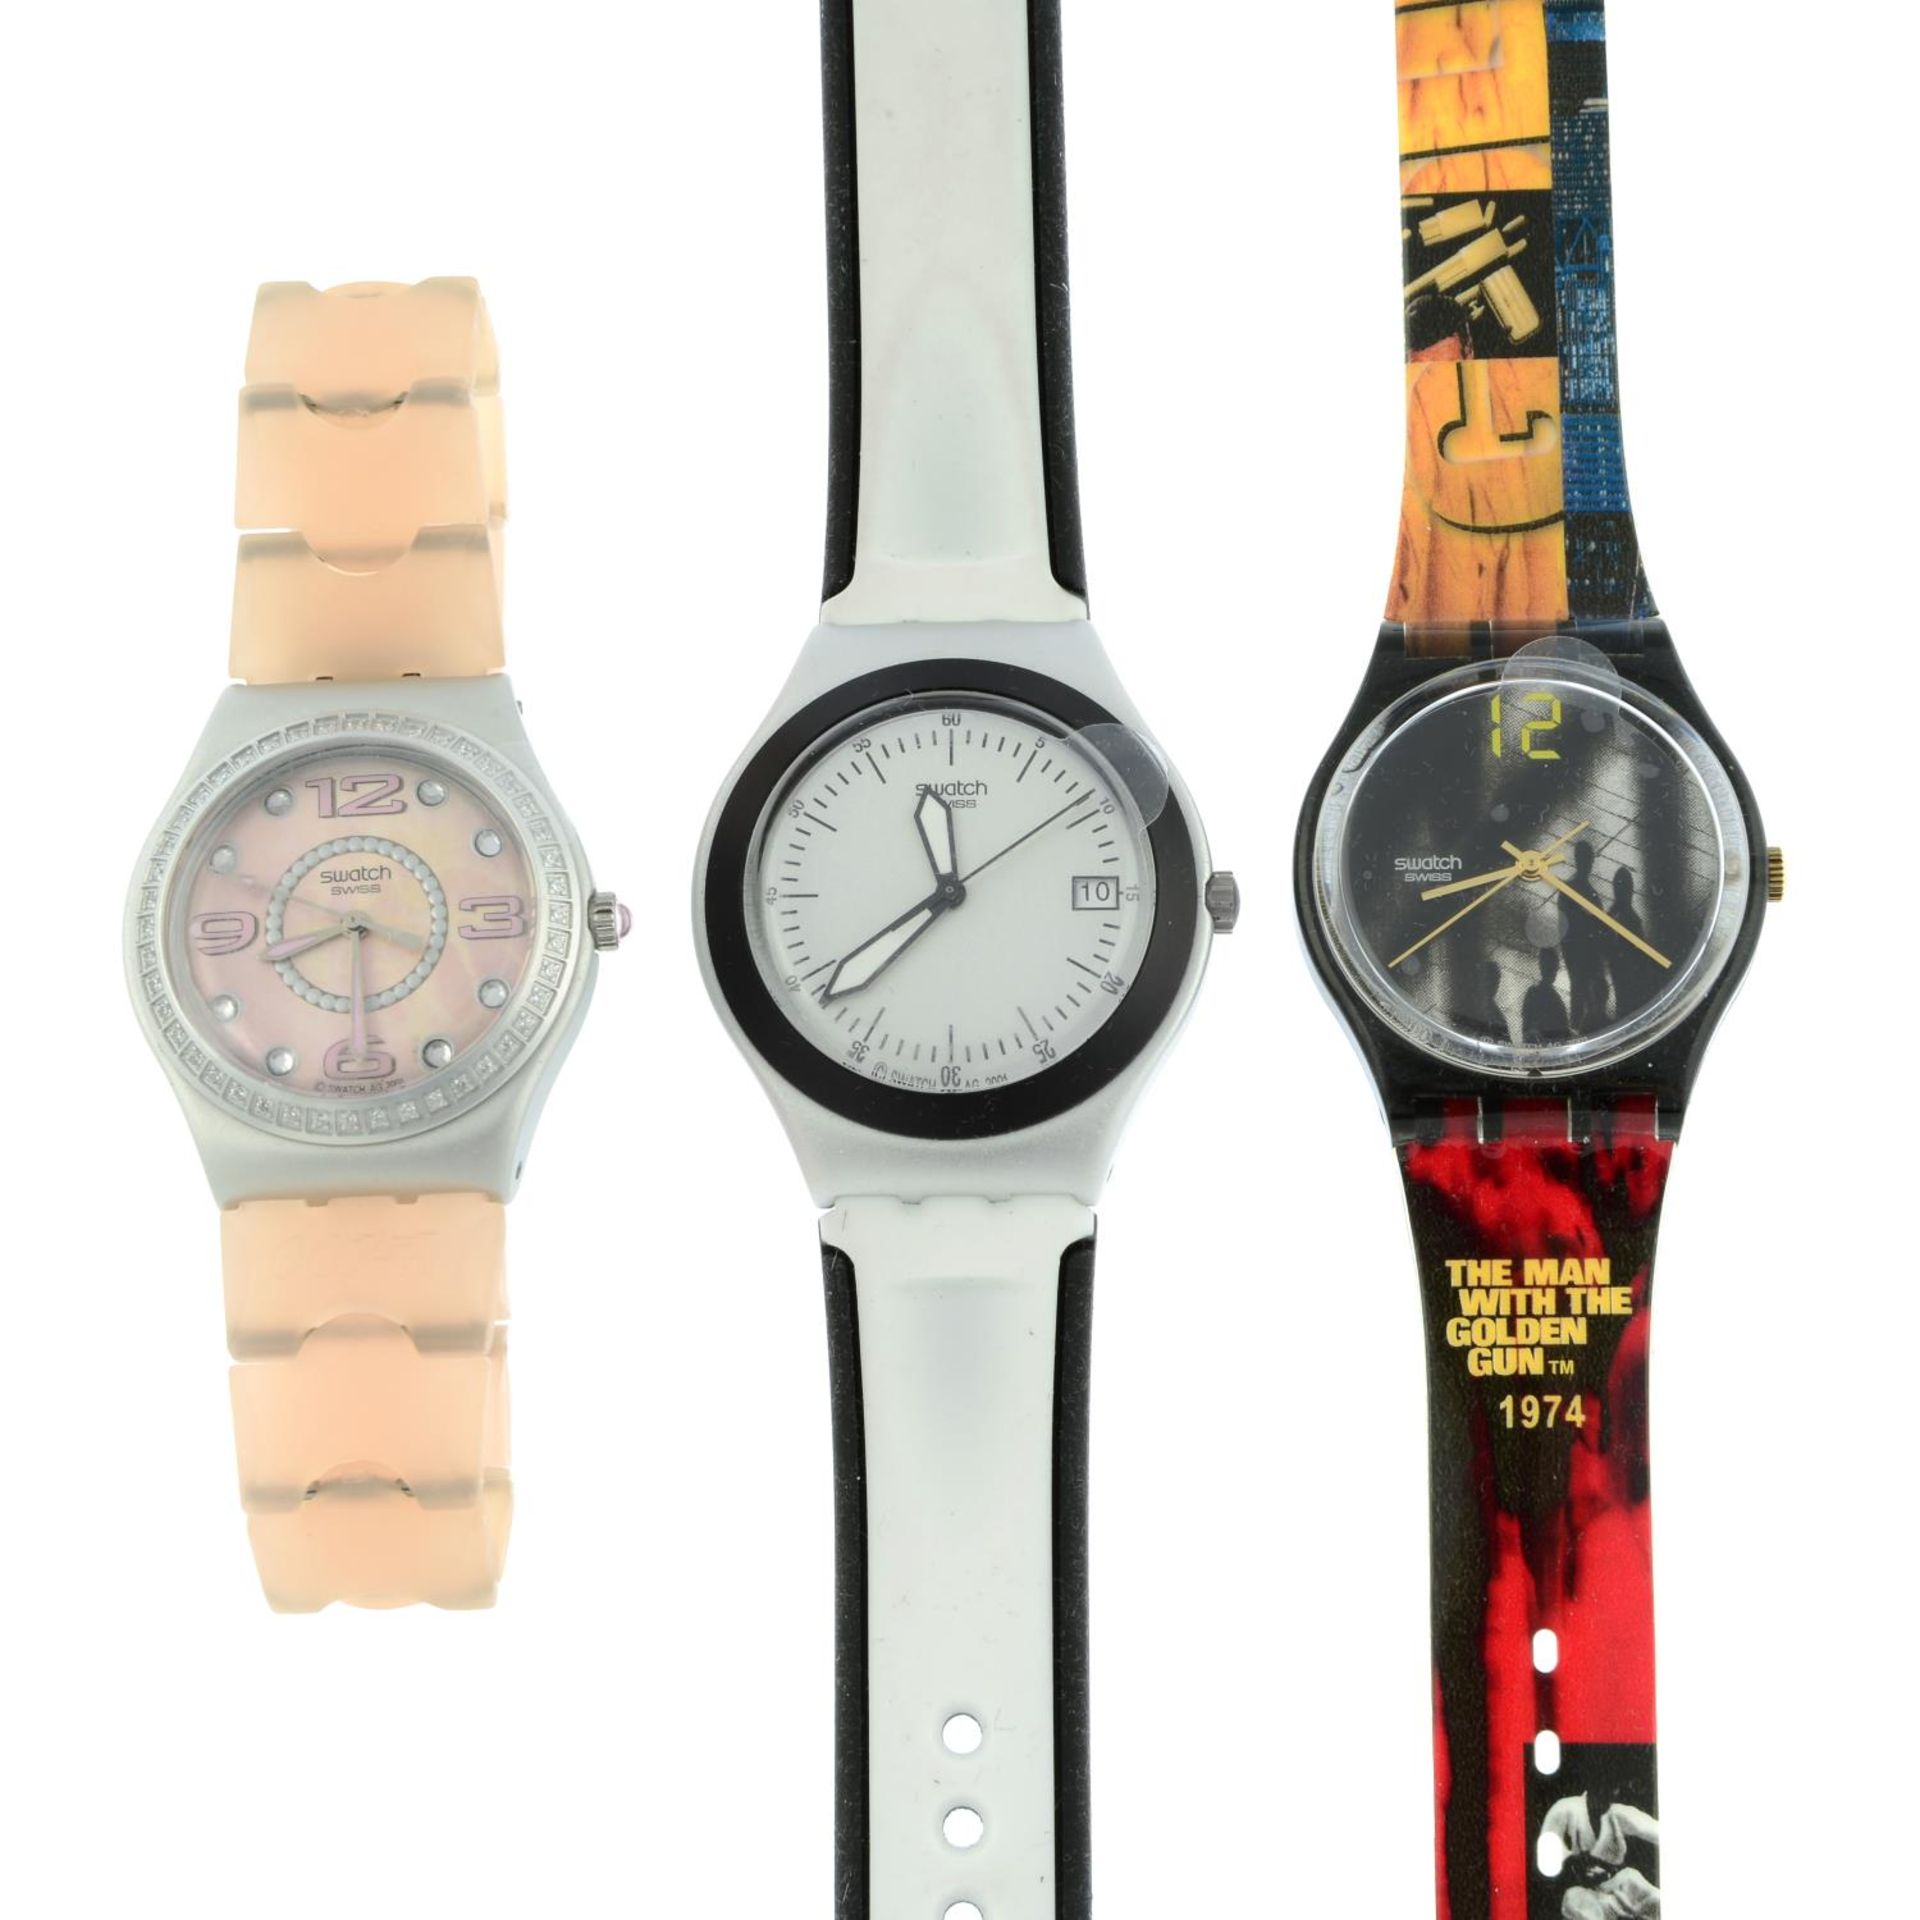 SWATCH - a limited edition 'James Bond' collection of twenty watches with presentation case. - Image 14 of 14